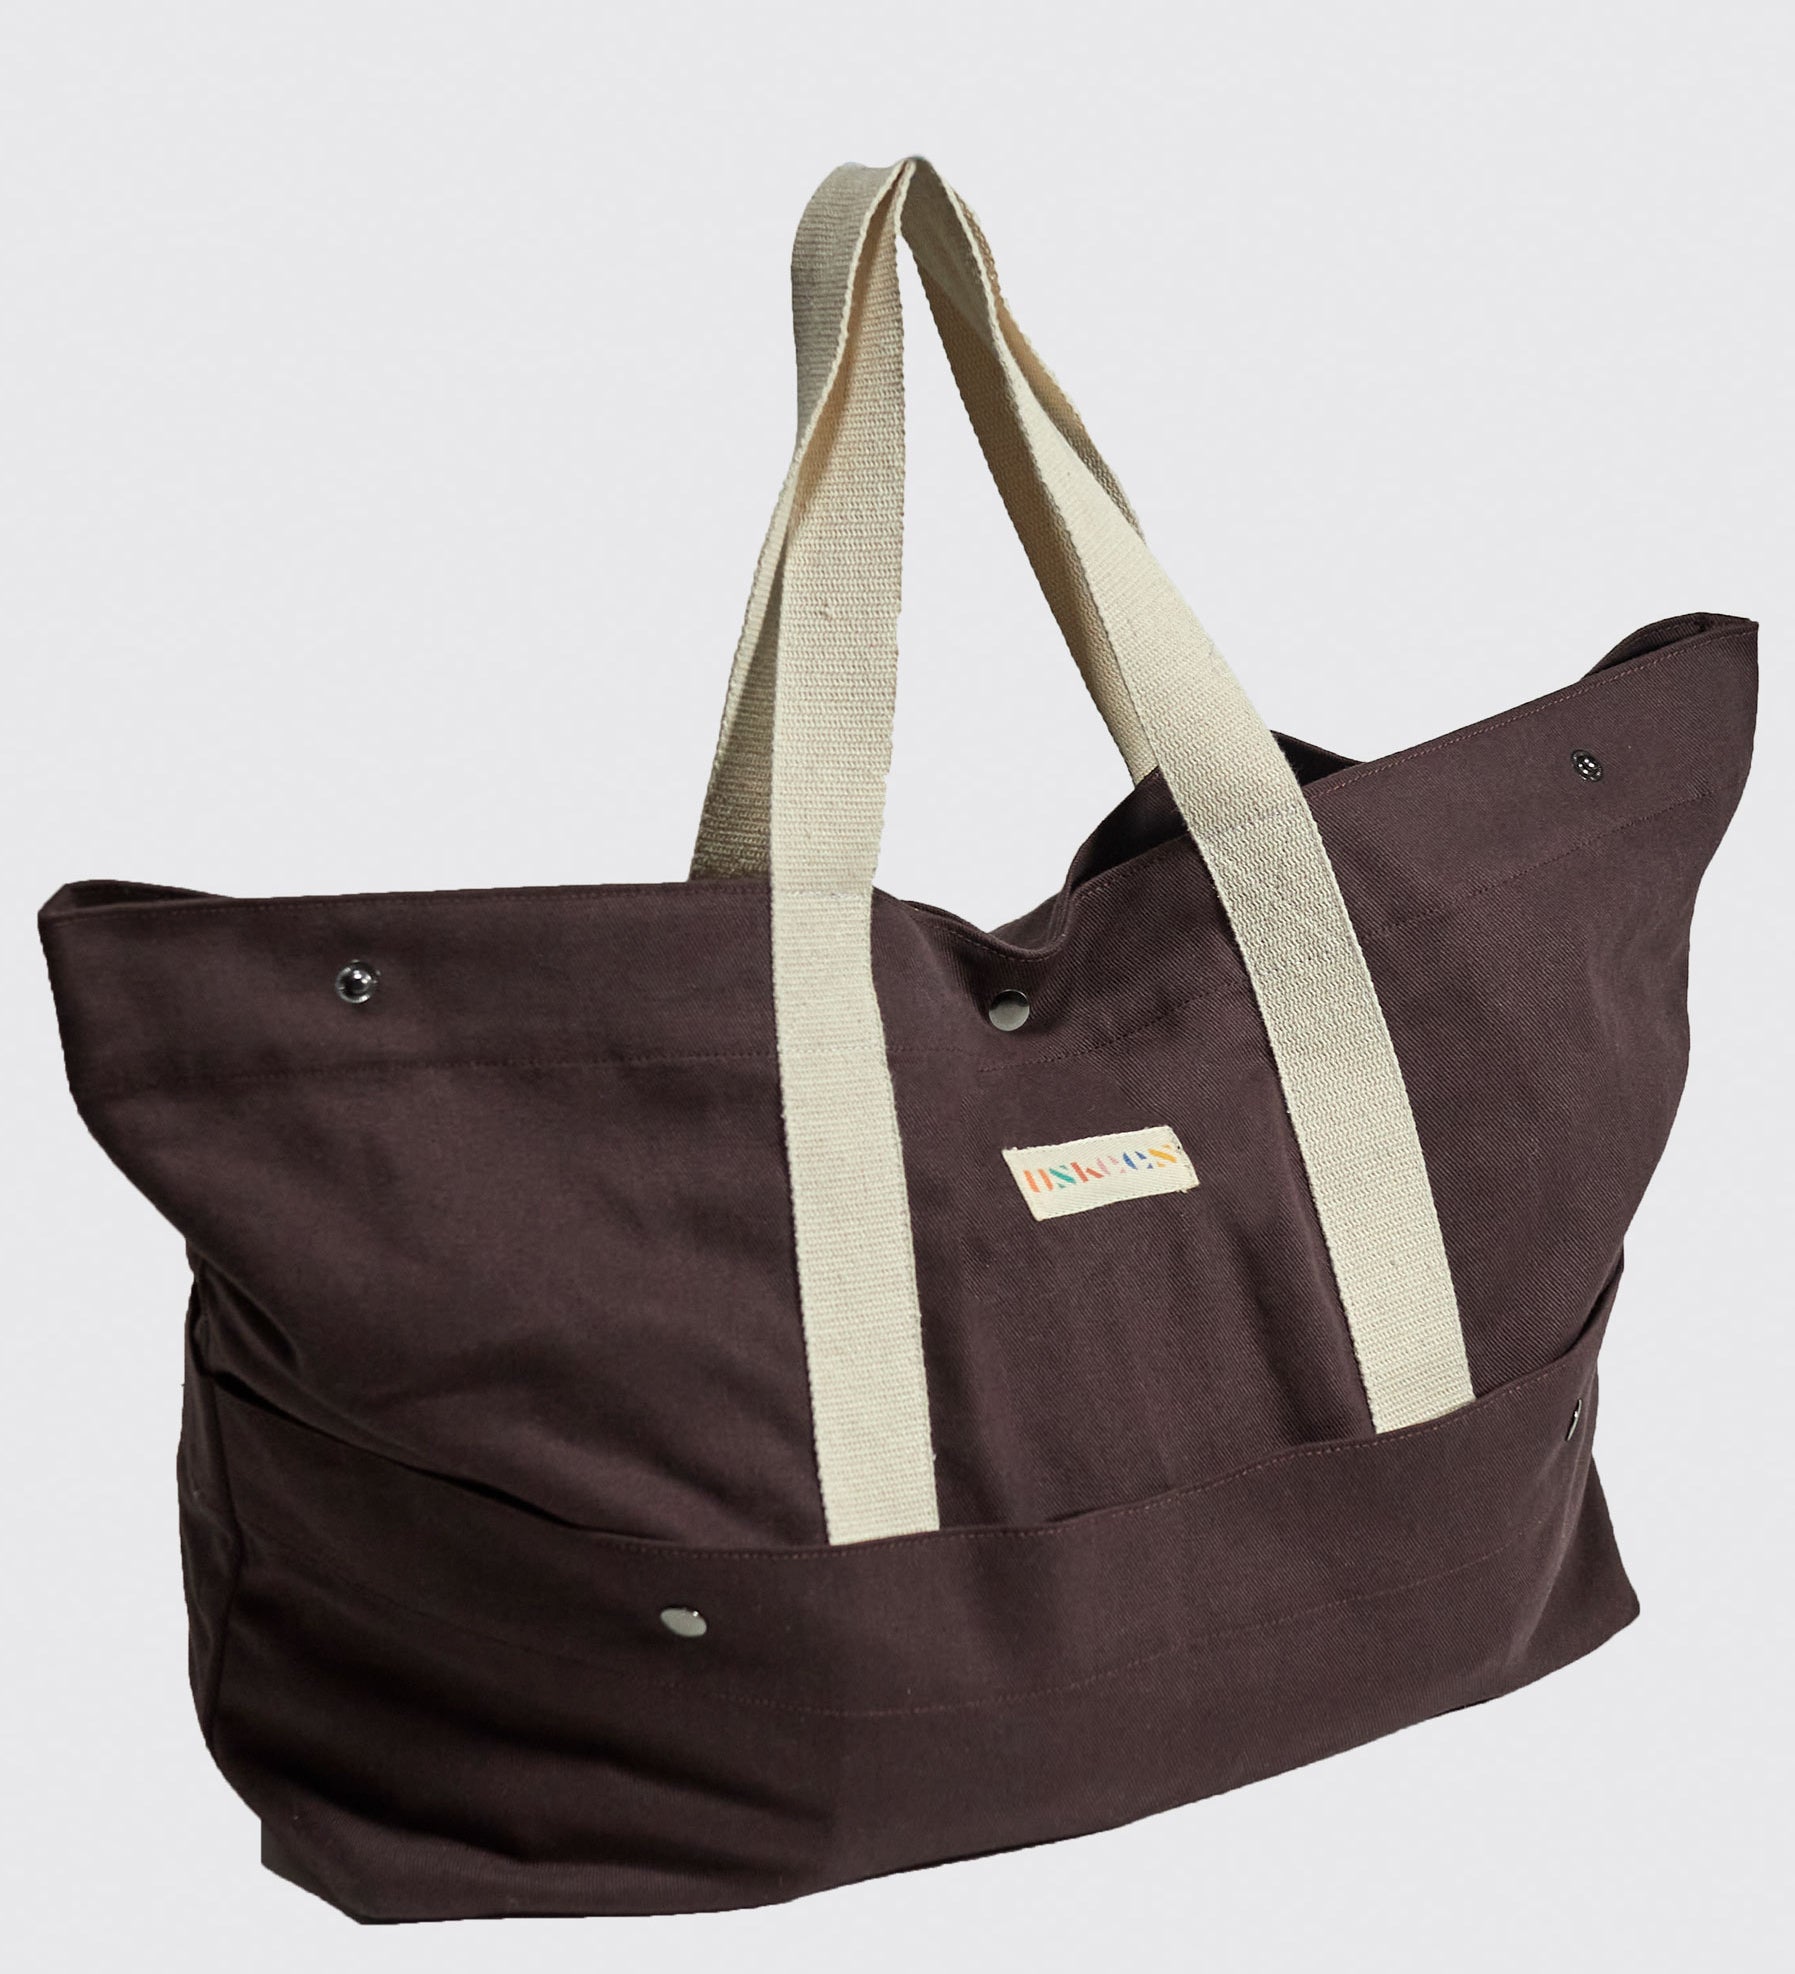 Full-length side view of Uskees #0401 basin bag in cotton drill, clearly showing the basin shape and carry handles.